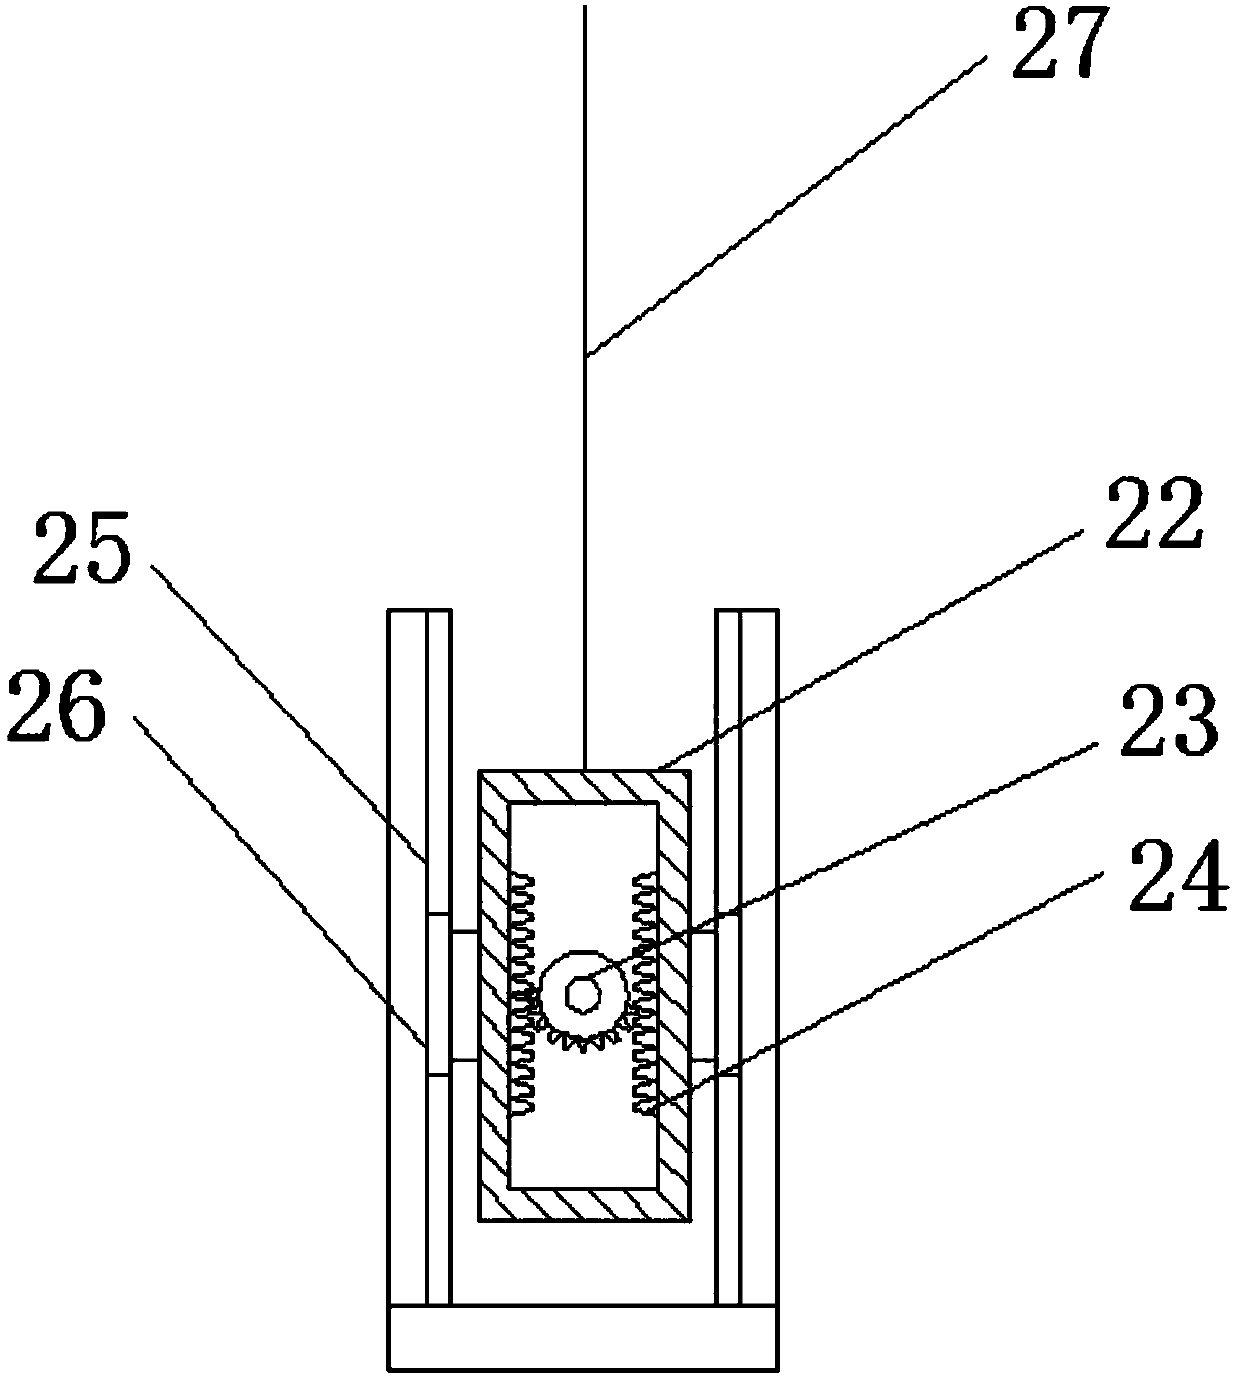 Tea leaf stir-frying device capable of achieving omnibearing operation